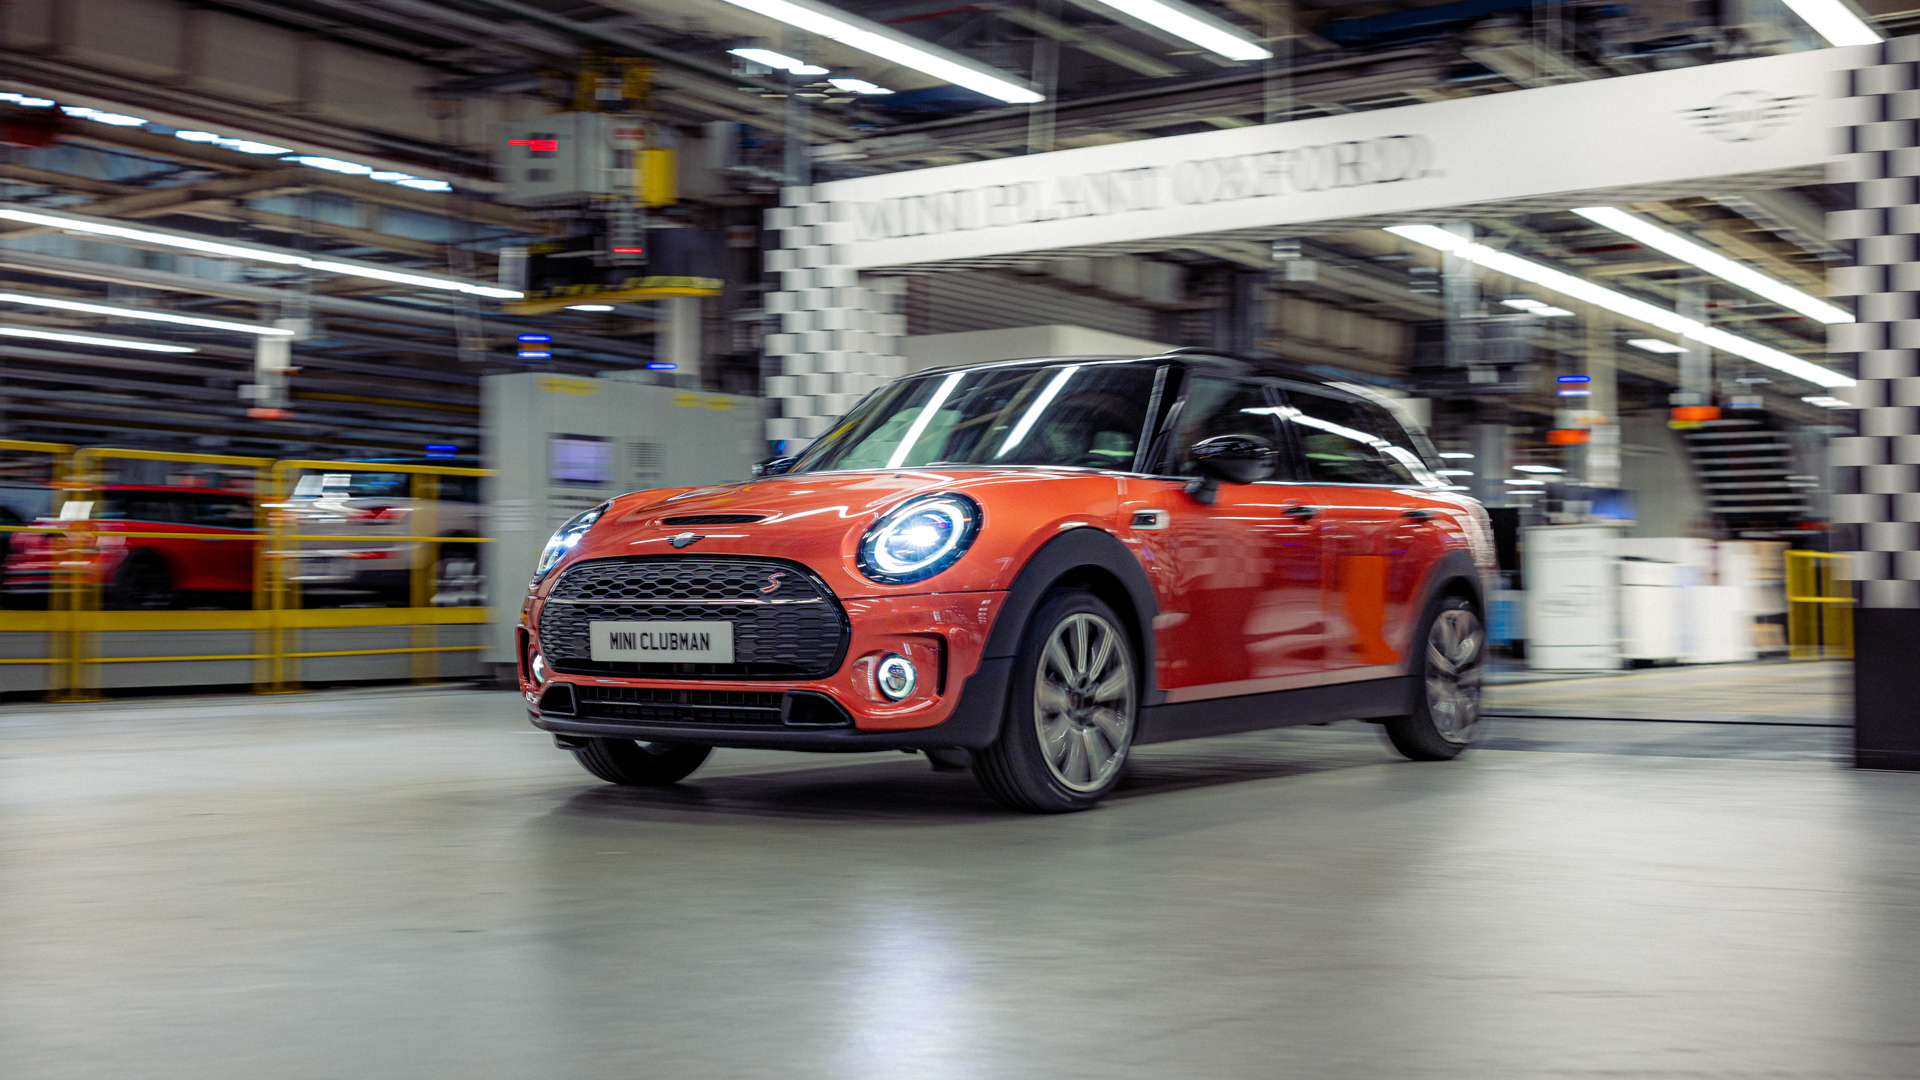 The Mini Clubman Is Dead and It’s Taking Its Beloved Barn Doors With It